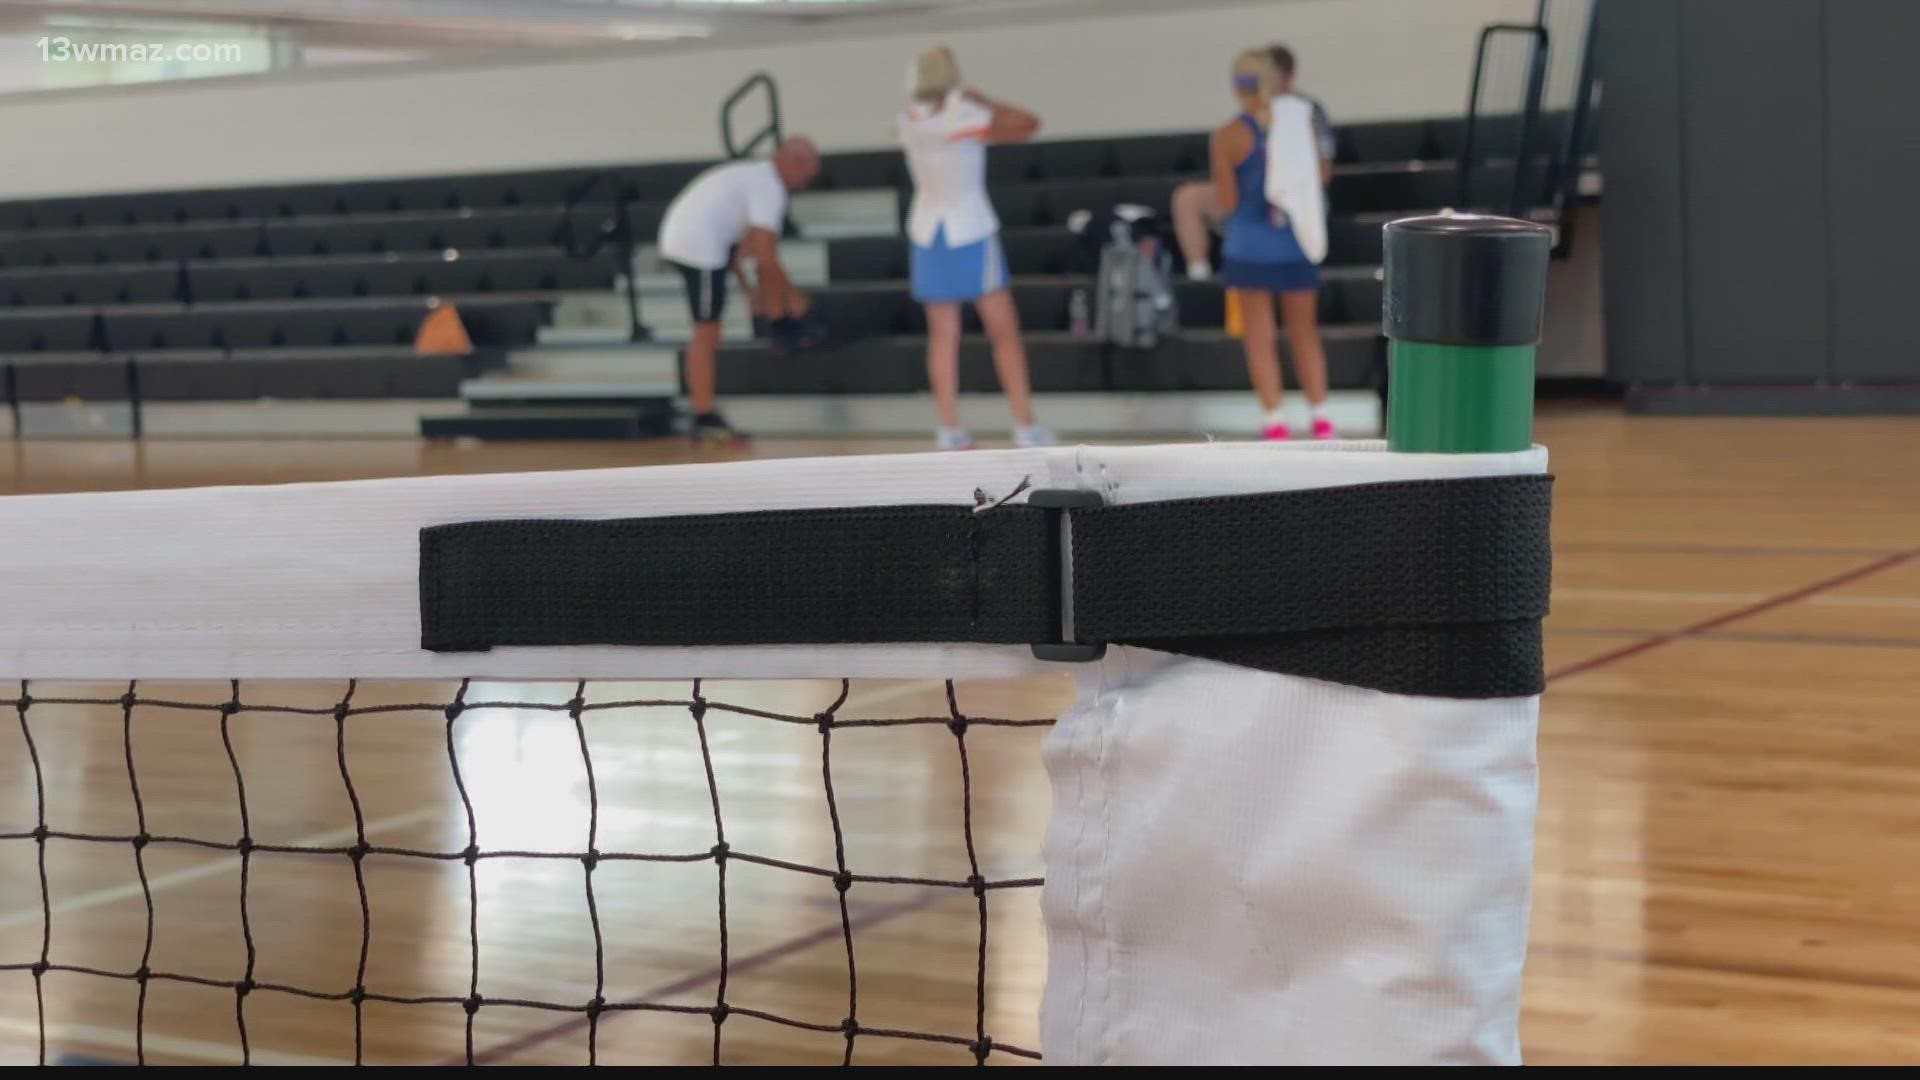 The 37th annual Georgia Golden Olympics started on the pickleball court Tuesday.